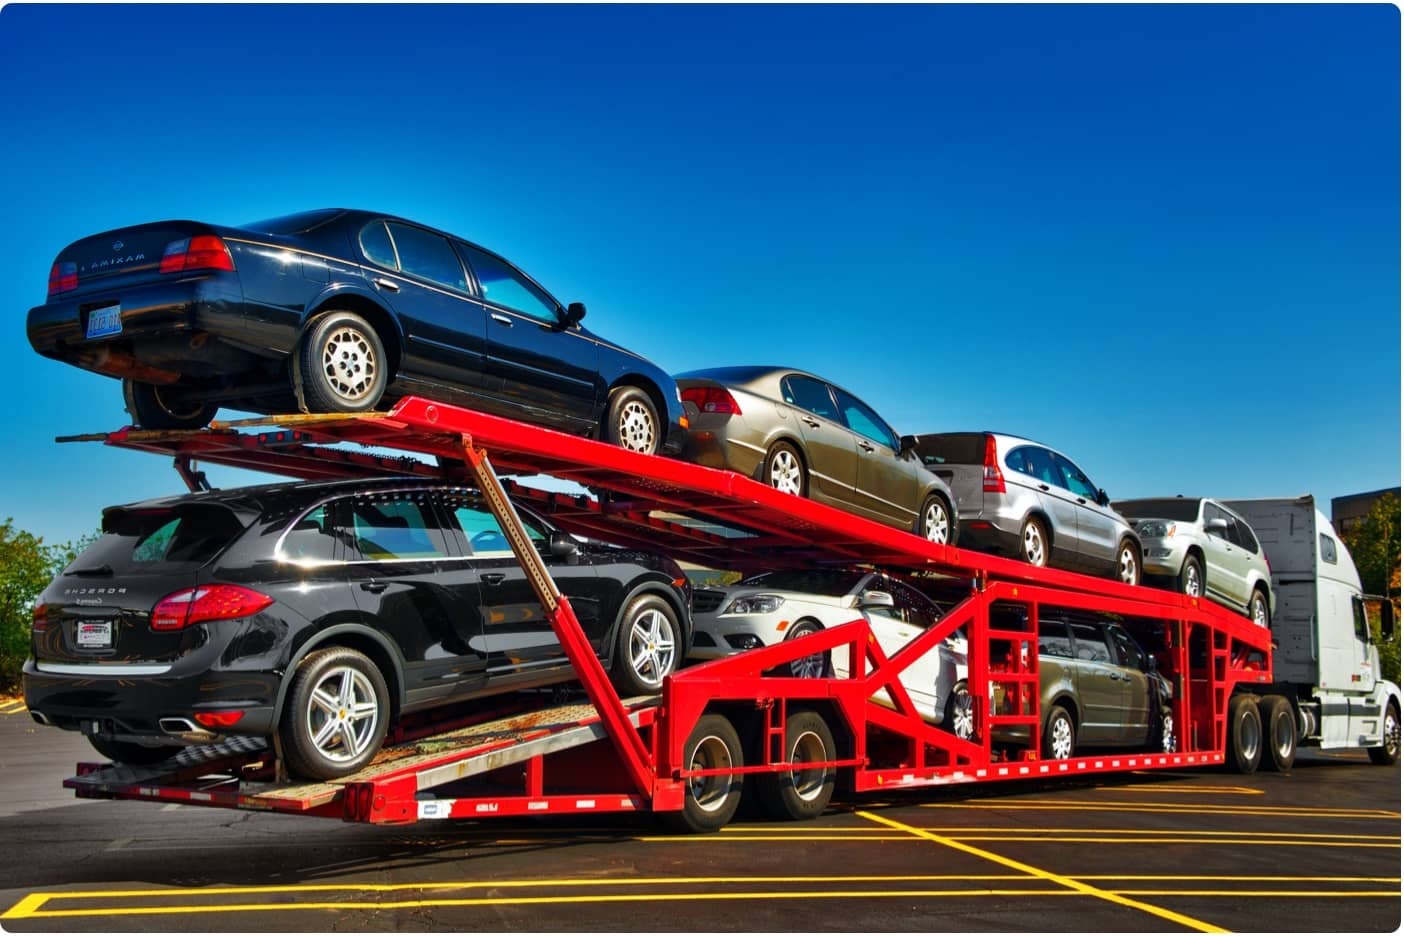 Read This If You Are Shipping Your Car for the First Time